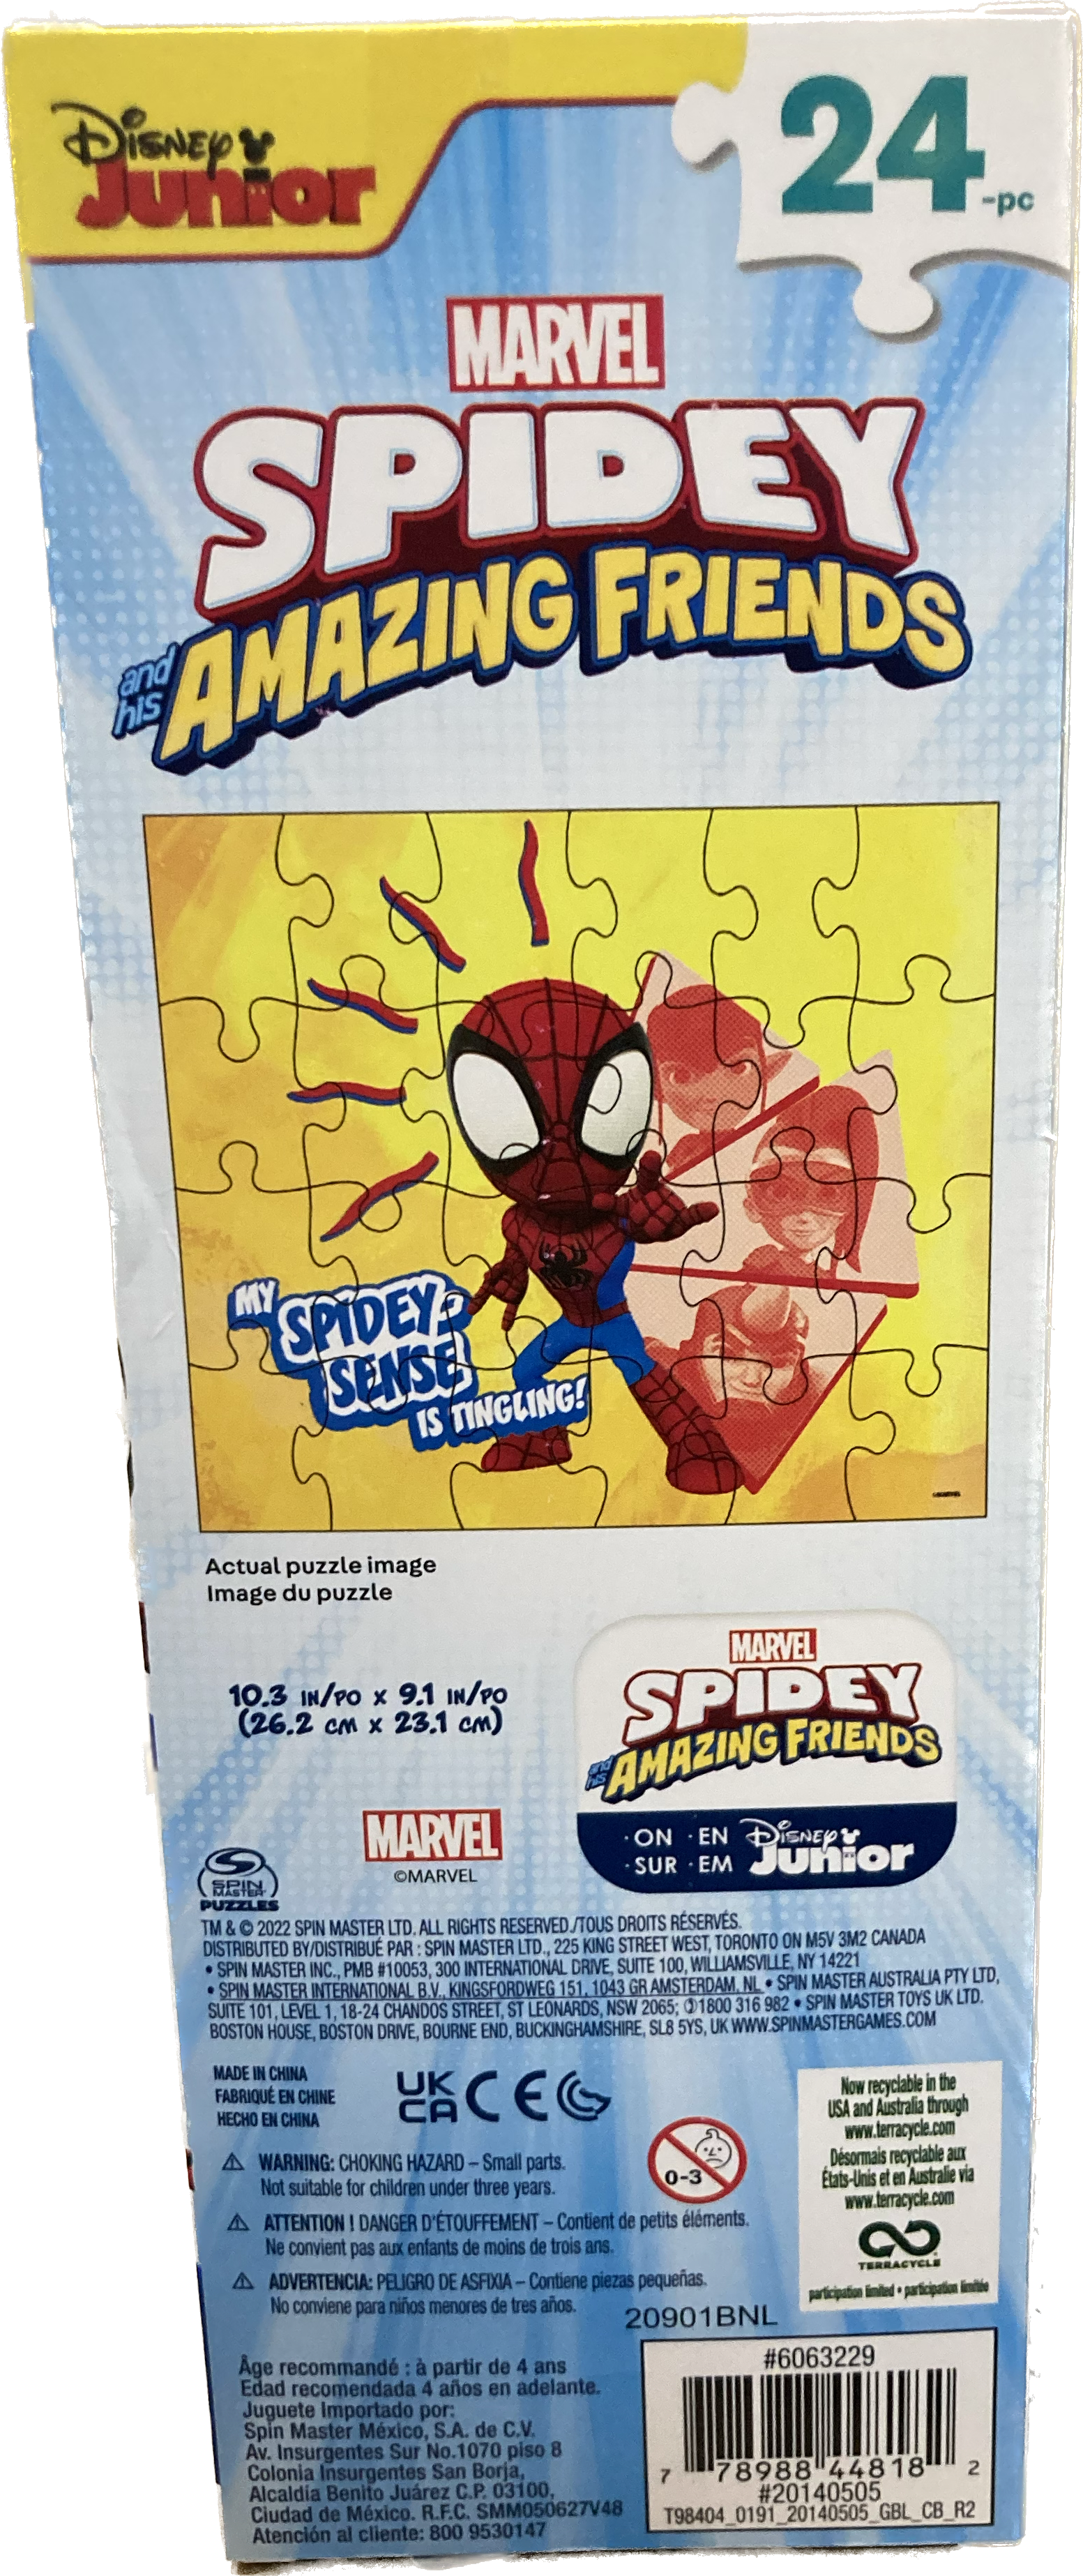 Marvel Spidey and His Amazing Friends 24 Piece Puzzle